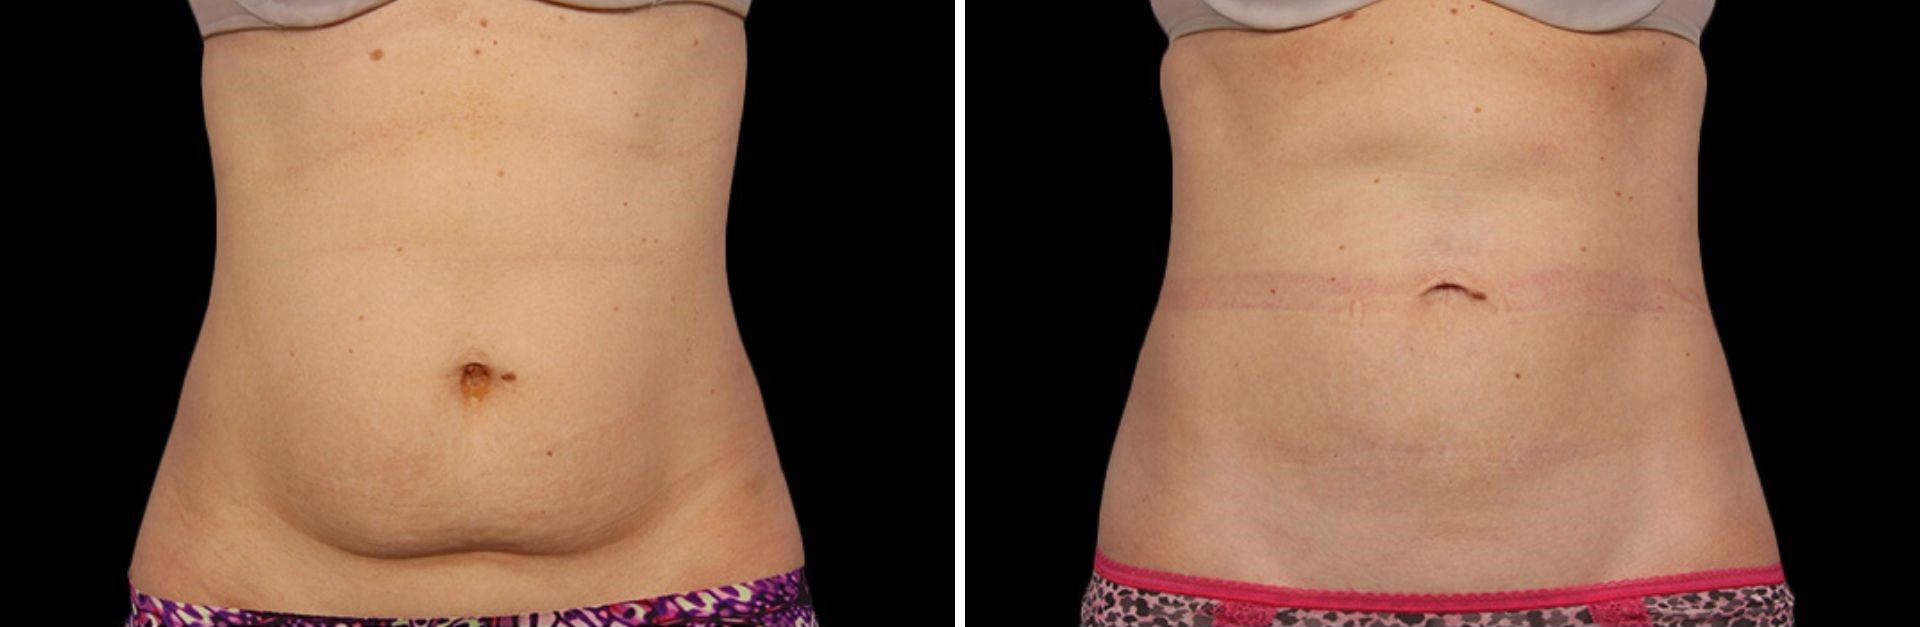 CoolSculpting Before and After with Pictures